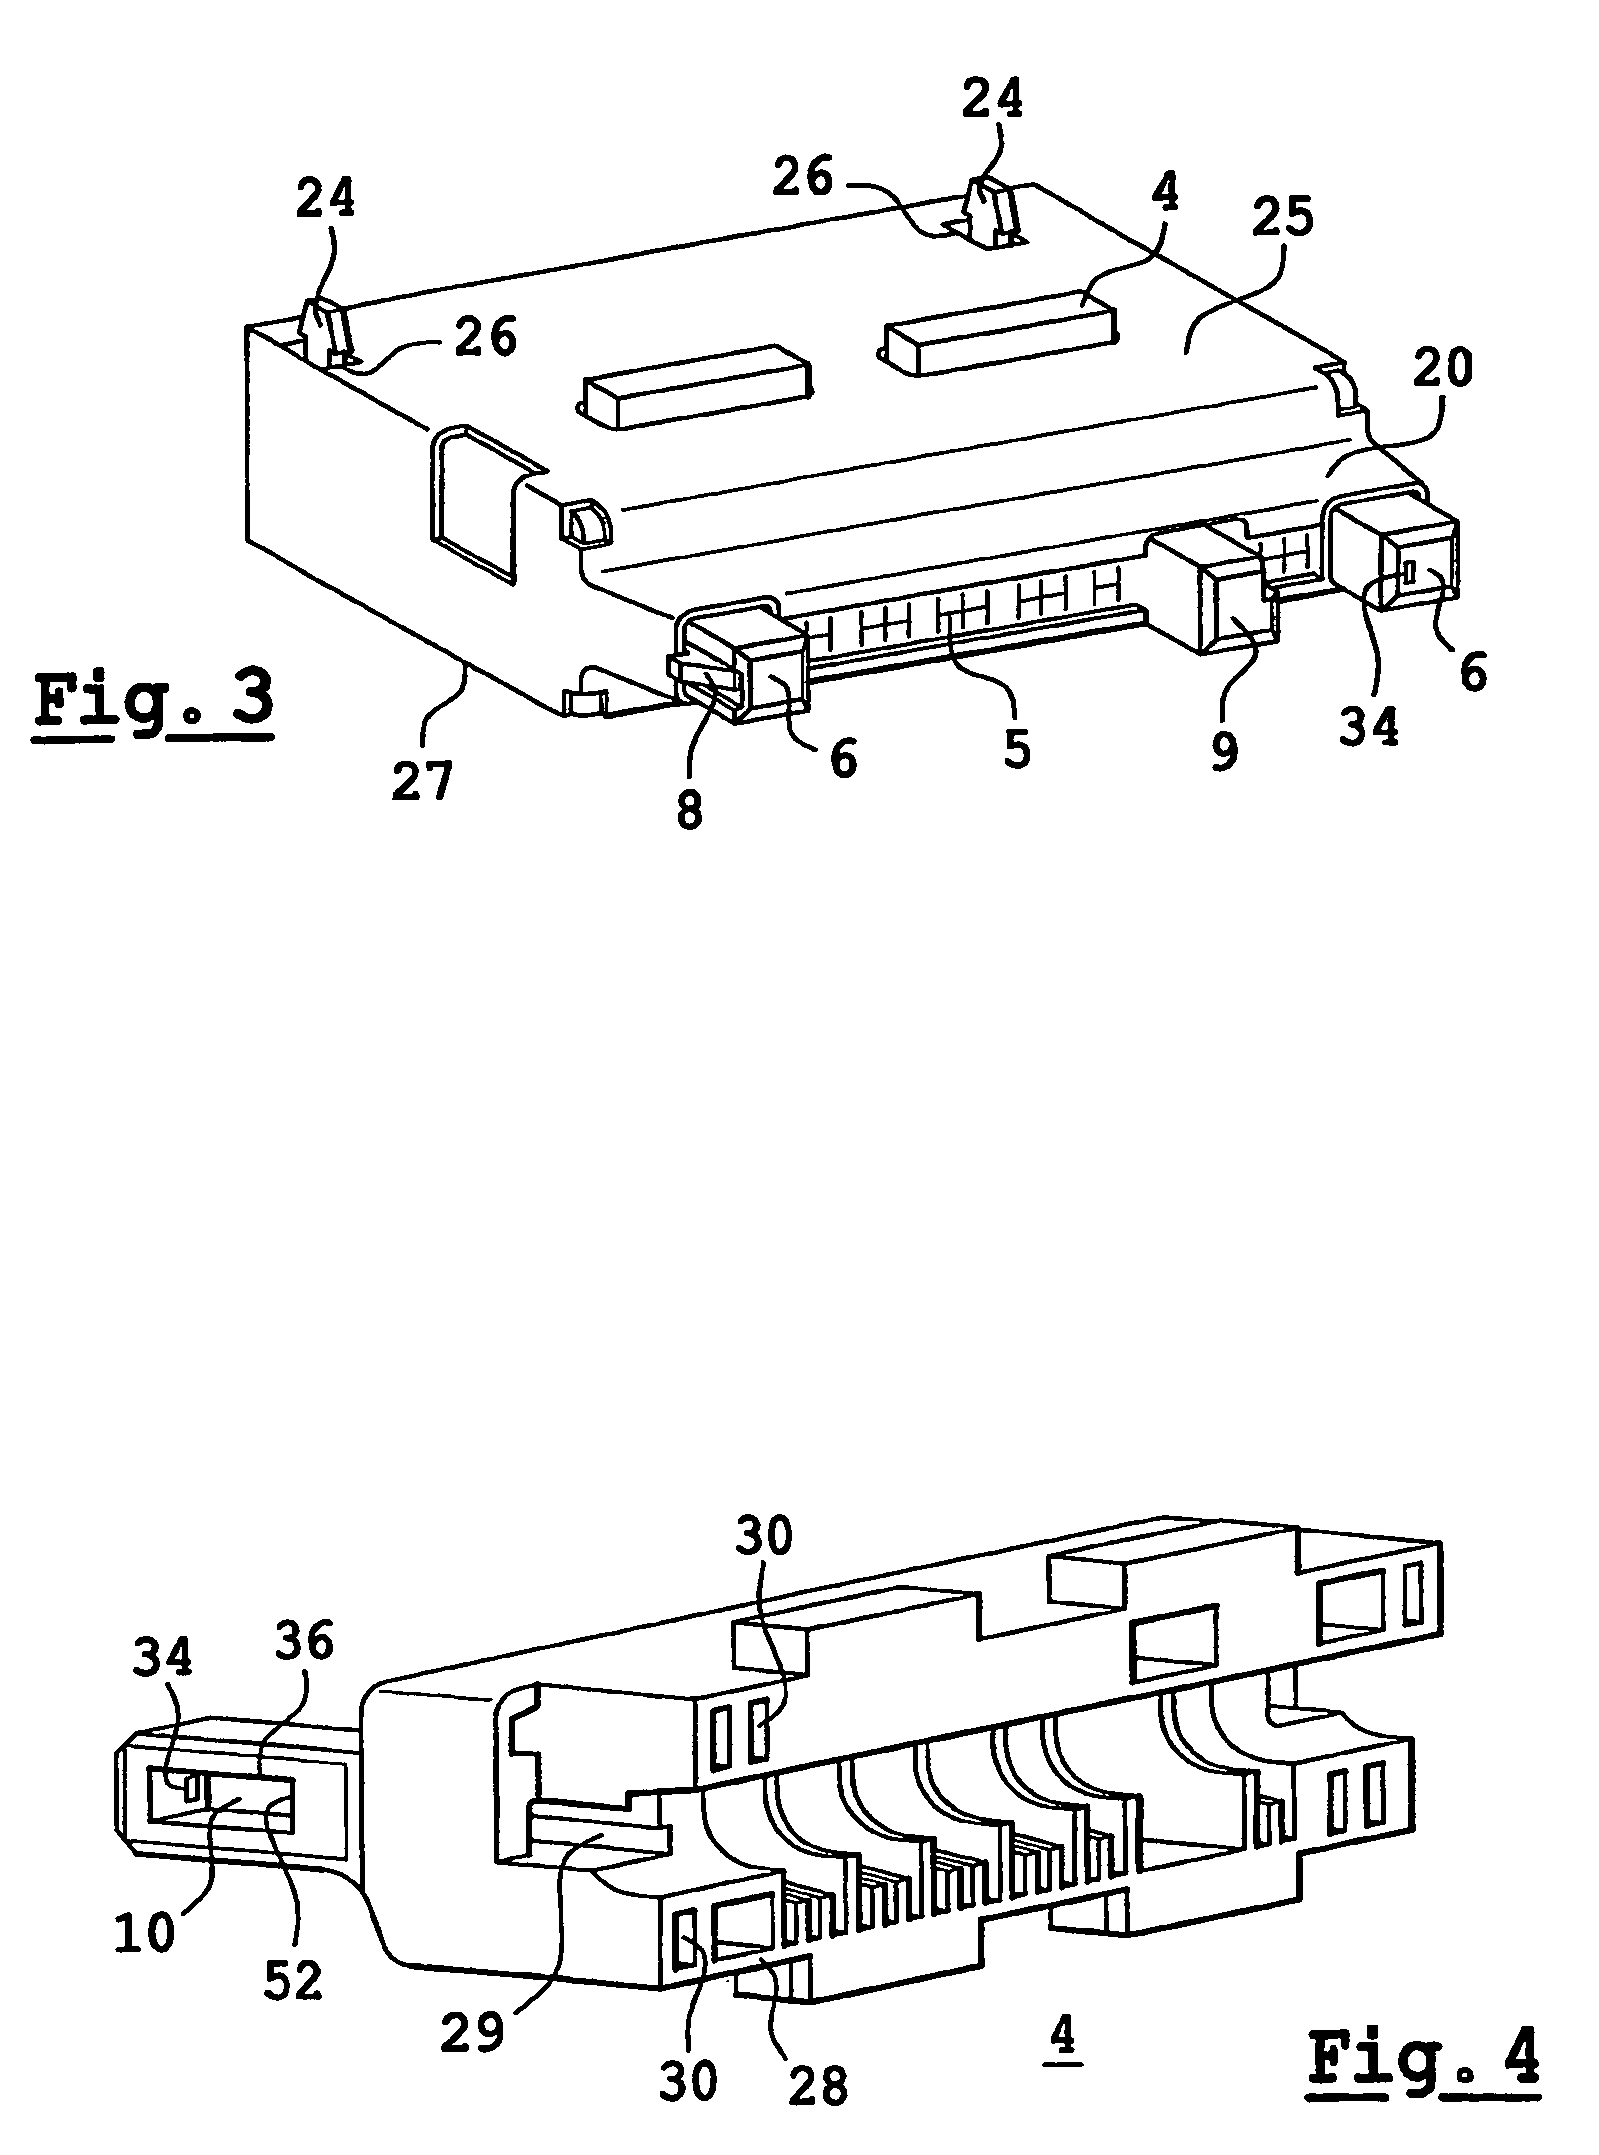 Plug connector provided with means for lateral locking